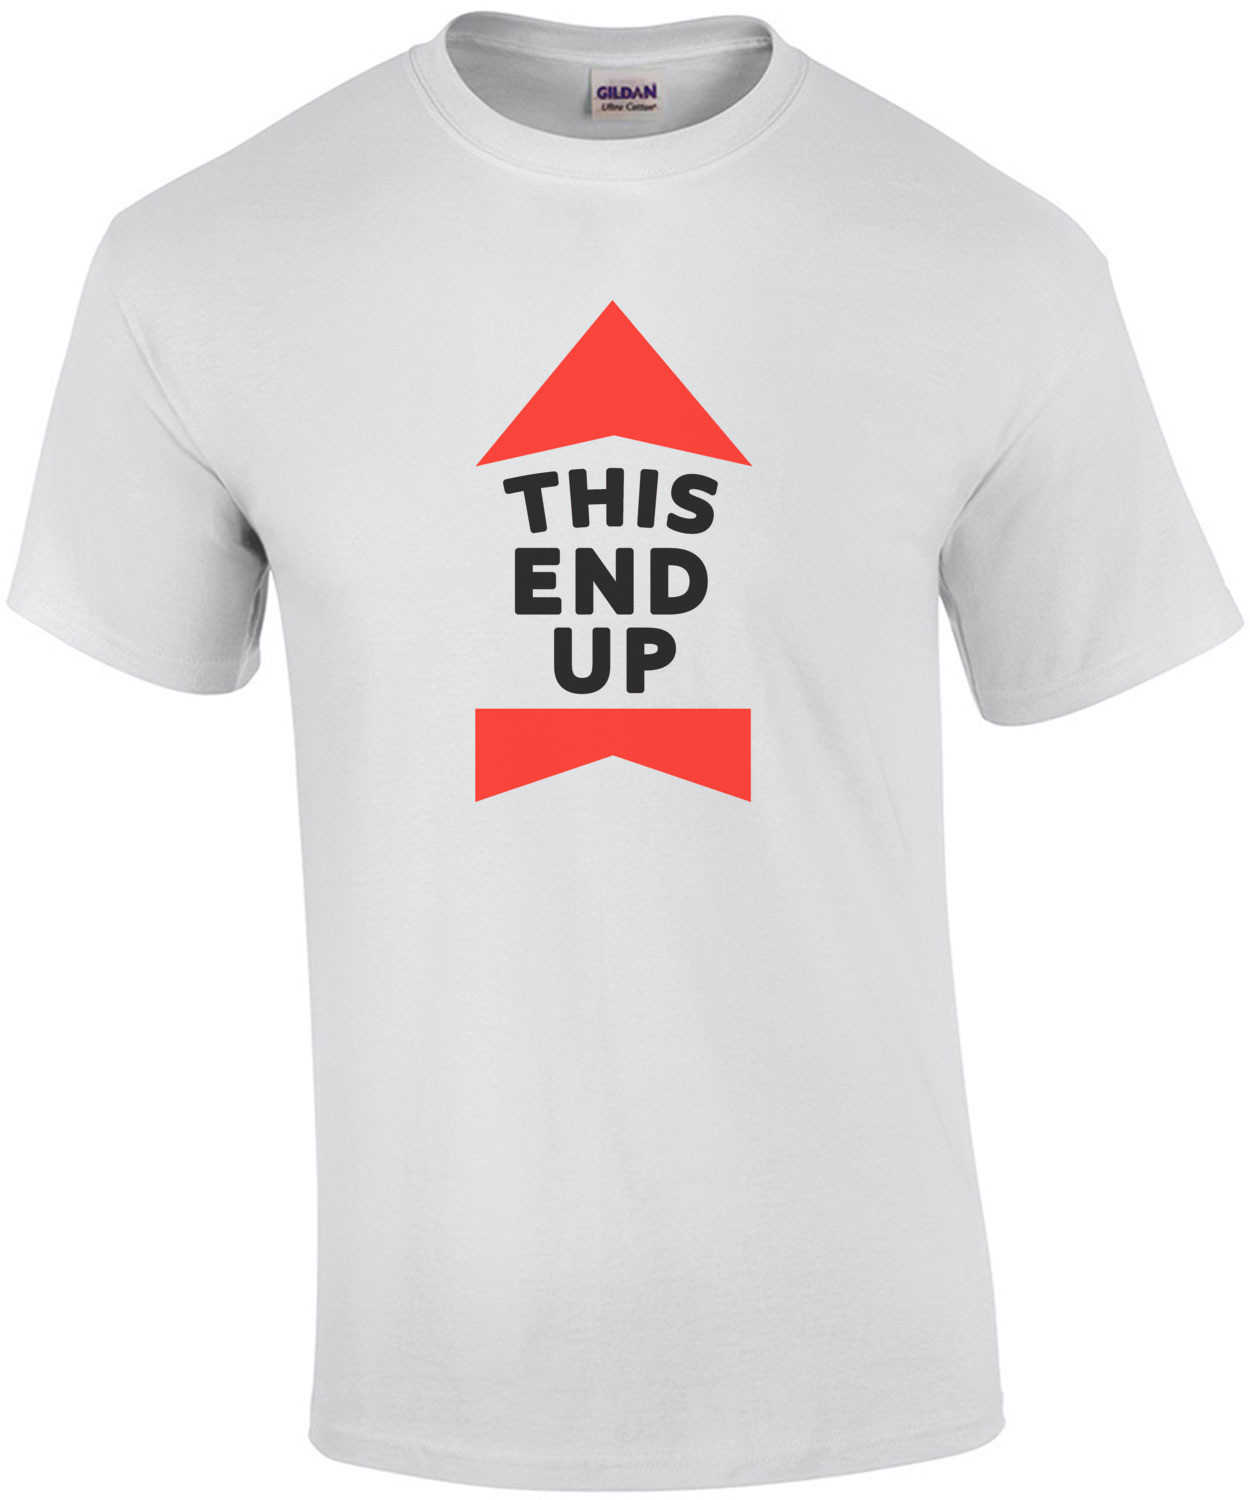 This End Up T-Shirt